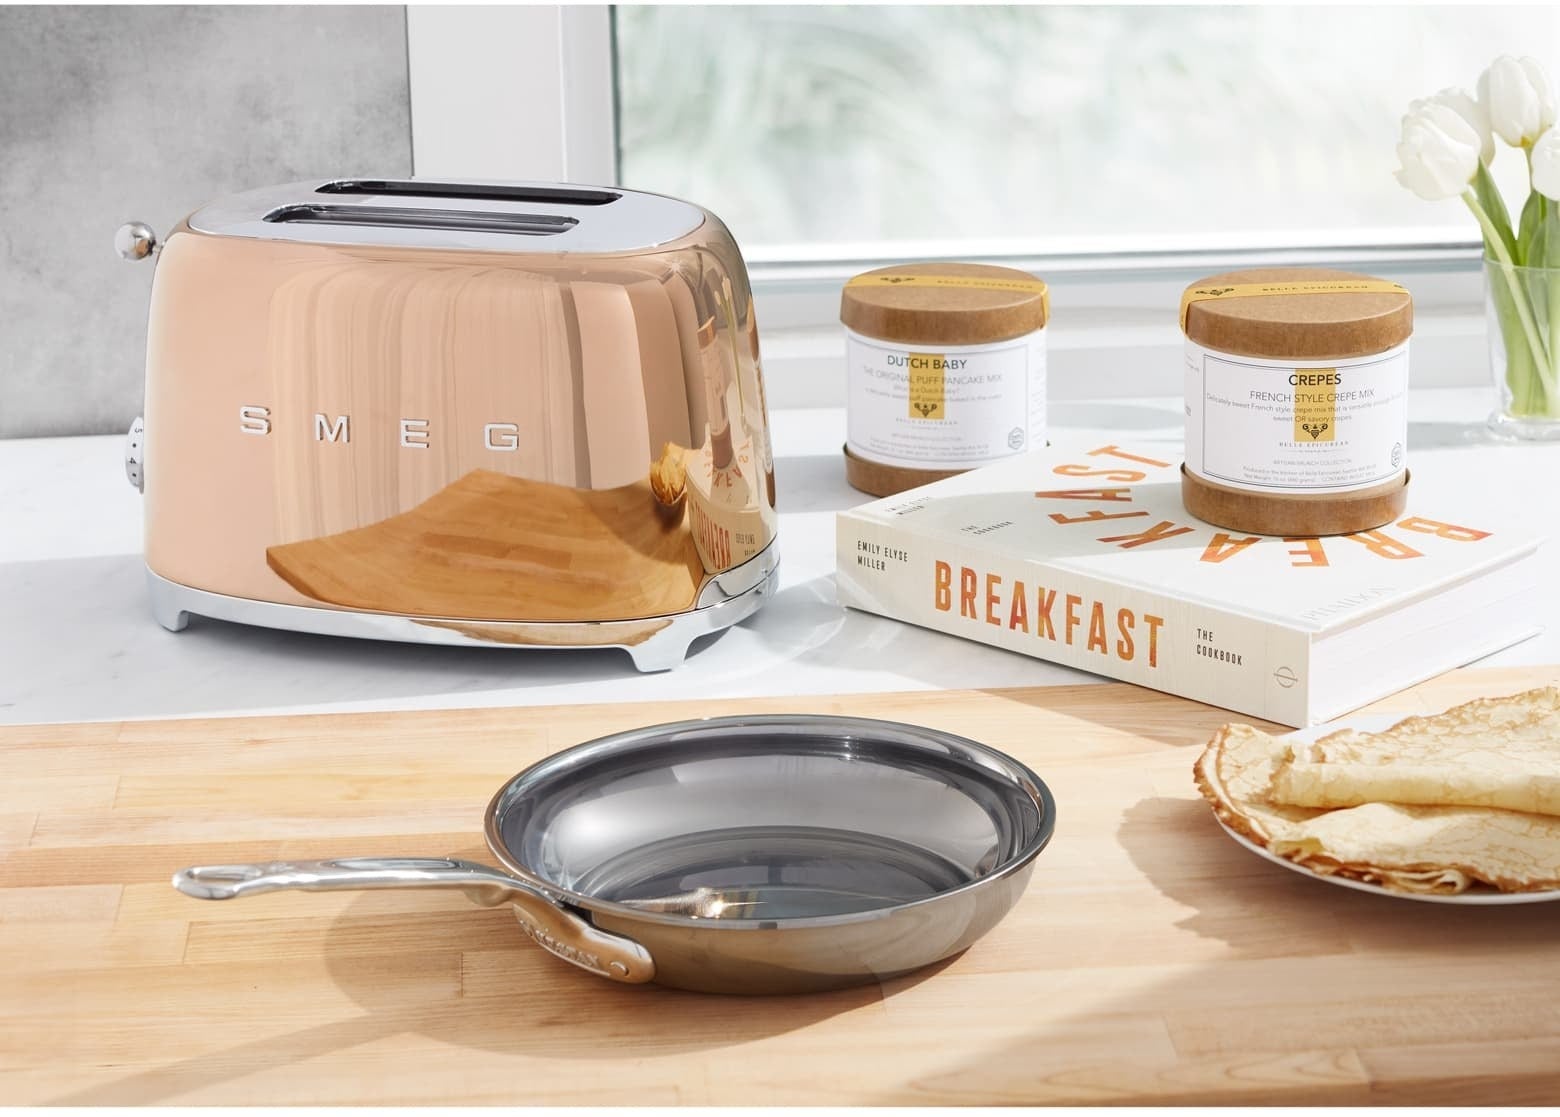 The toaster in shiny rose gold with two slots and the word &quot;Smeg&quot; on the side sitting on a kitchen counter